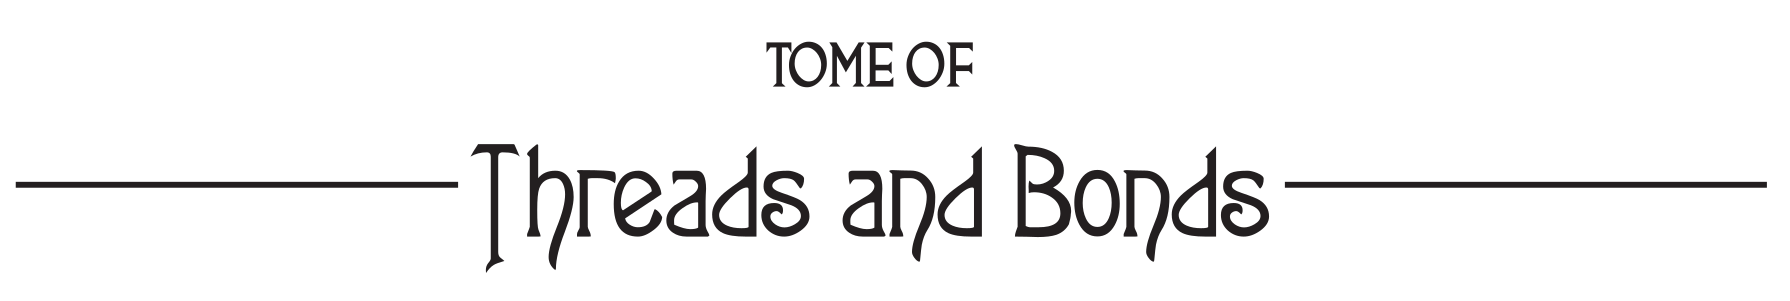 Tome of Threads and Bonds